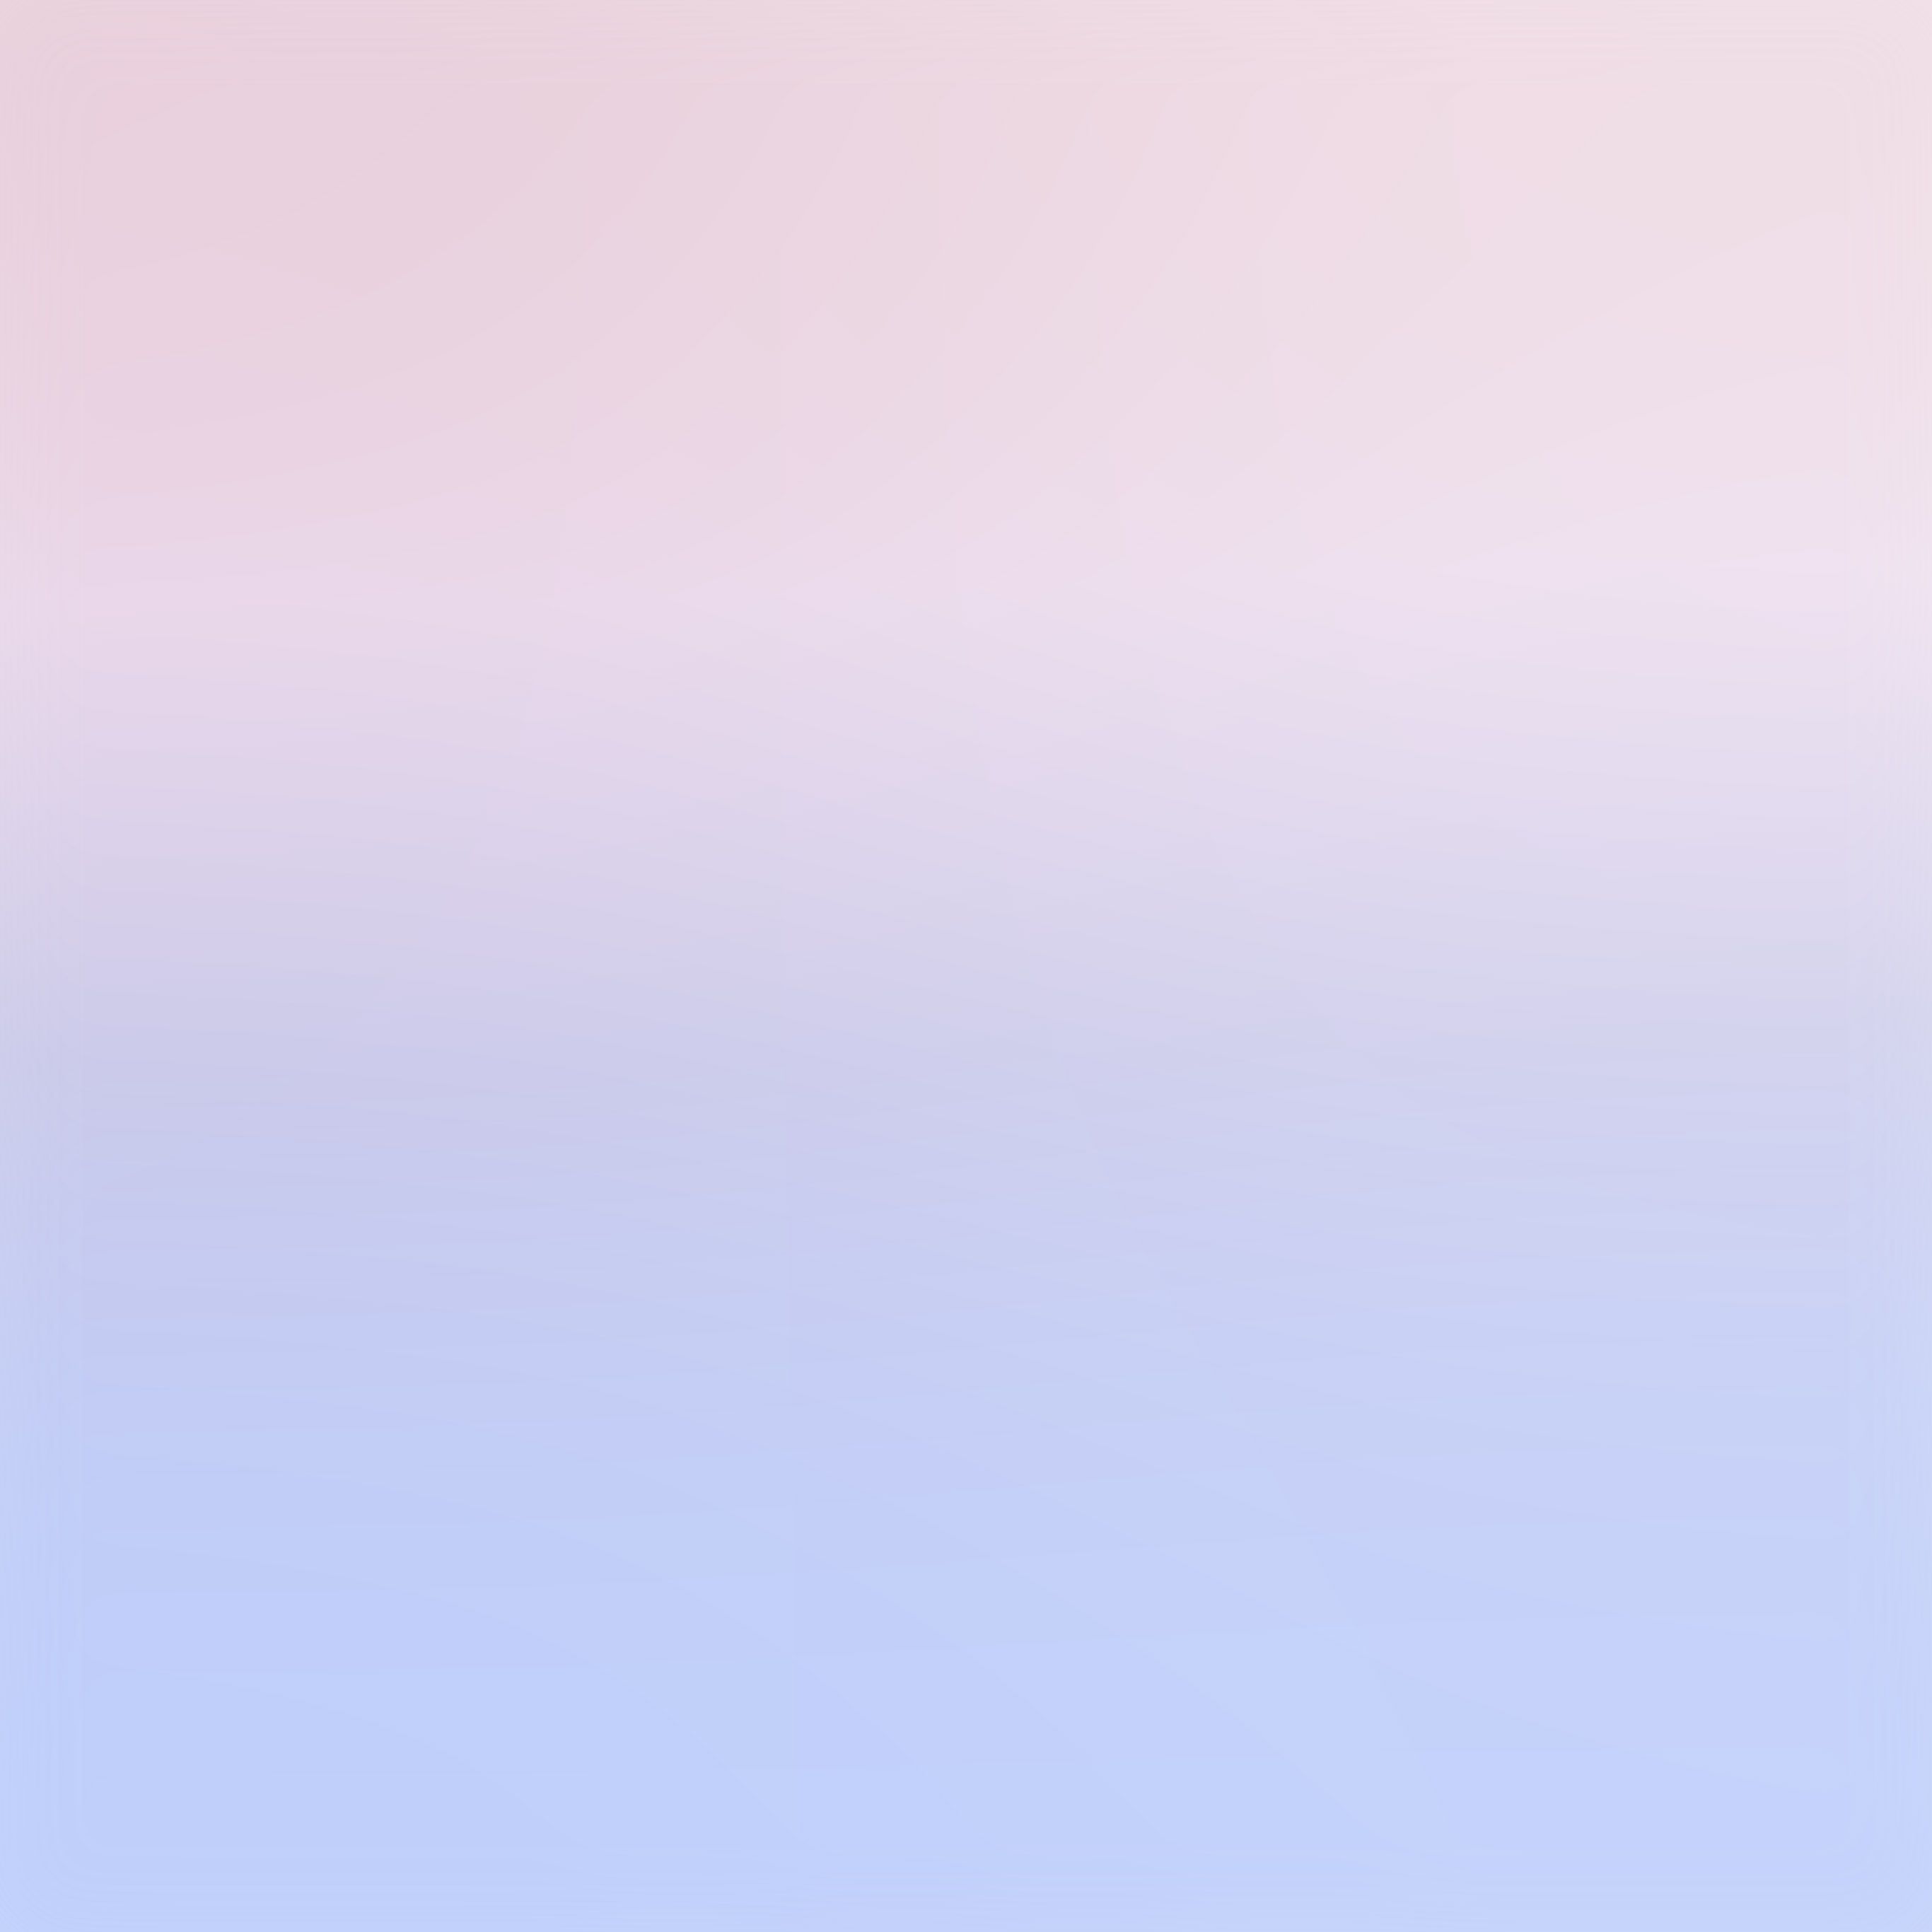 A pink and blue background with an airplane flying over it - Pastel blue